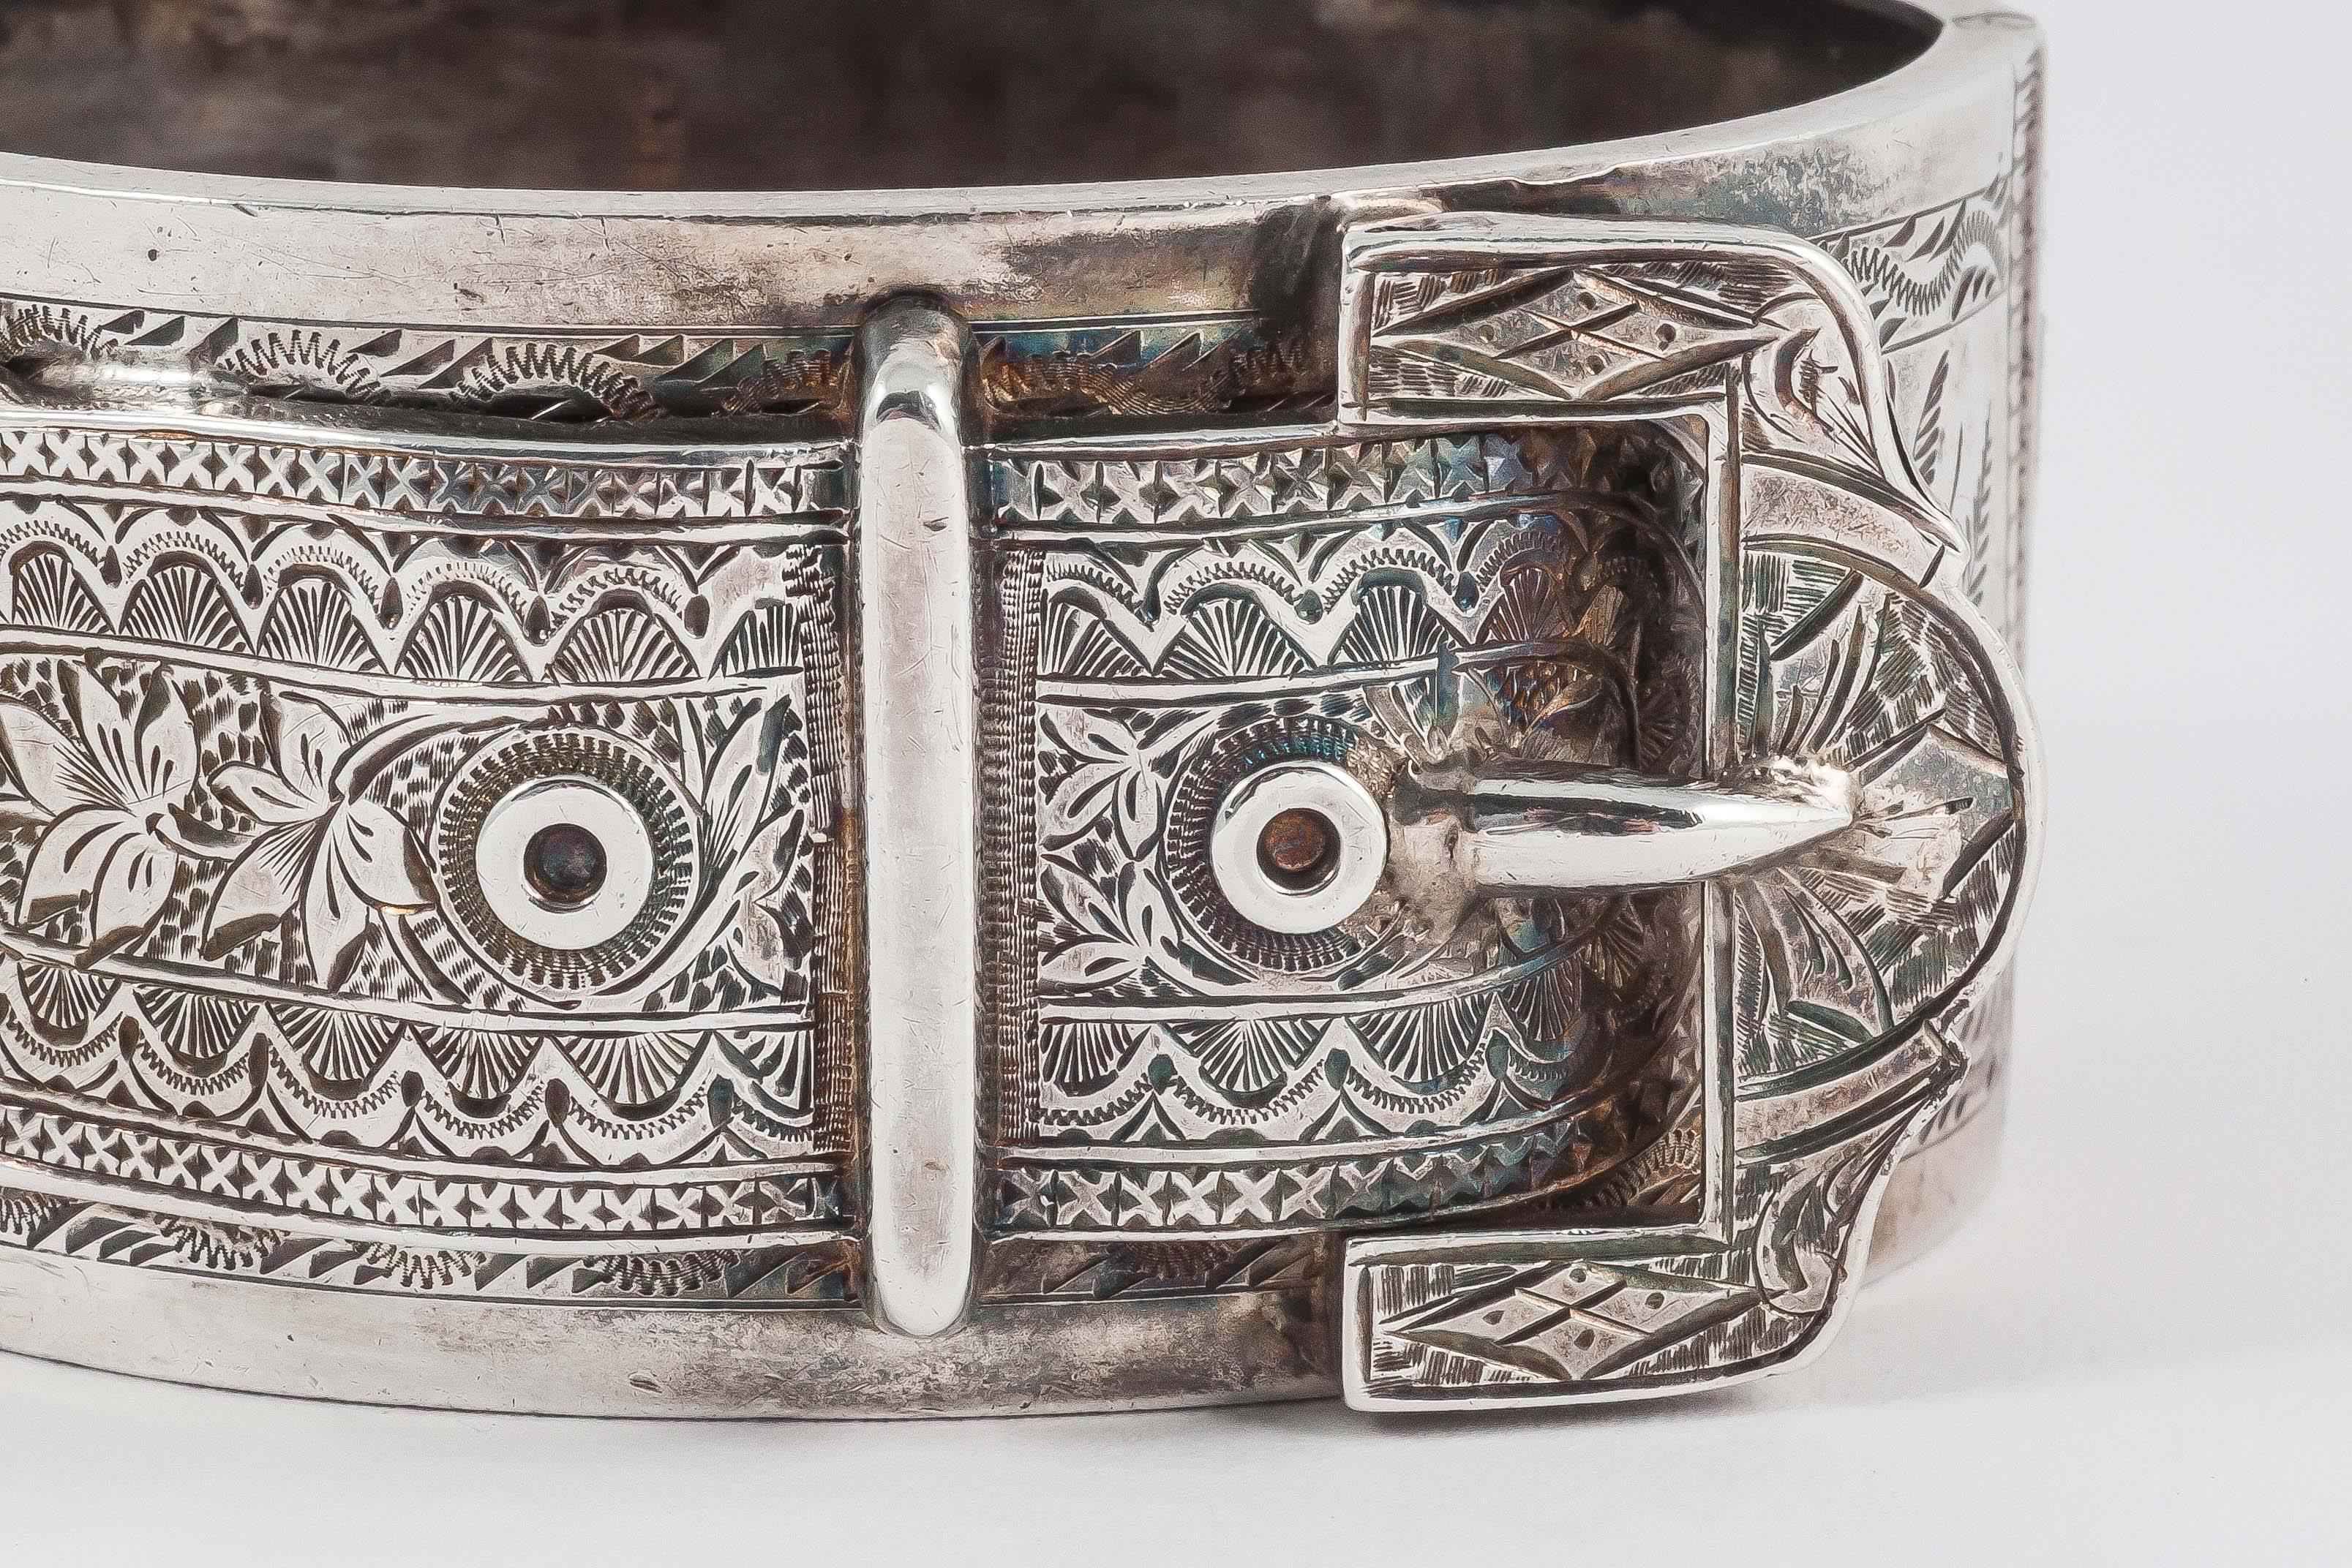 This super cuff is hallmarked, but they are tiny so all I can see is the lion that denotes it is English sterling silver. This is a bold and timeless design that looks unexpectedly modern but has the charm of floral engraving on the buckle and